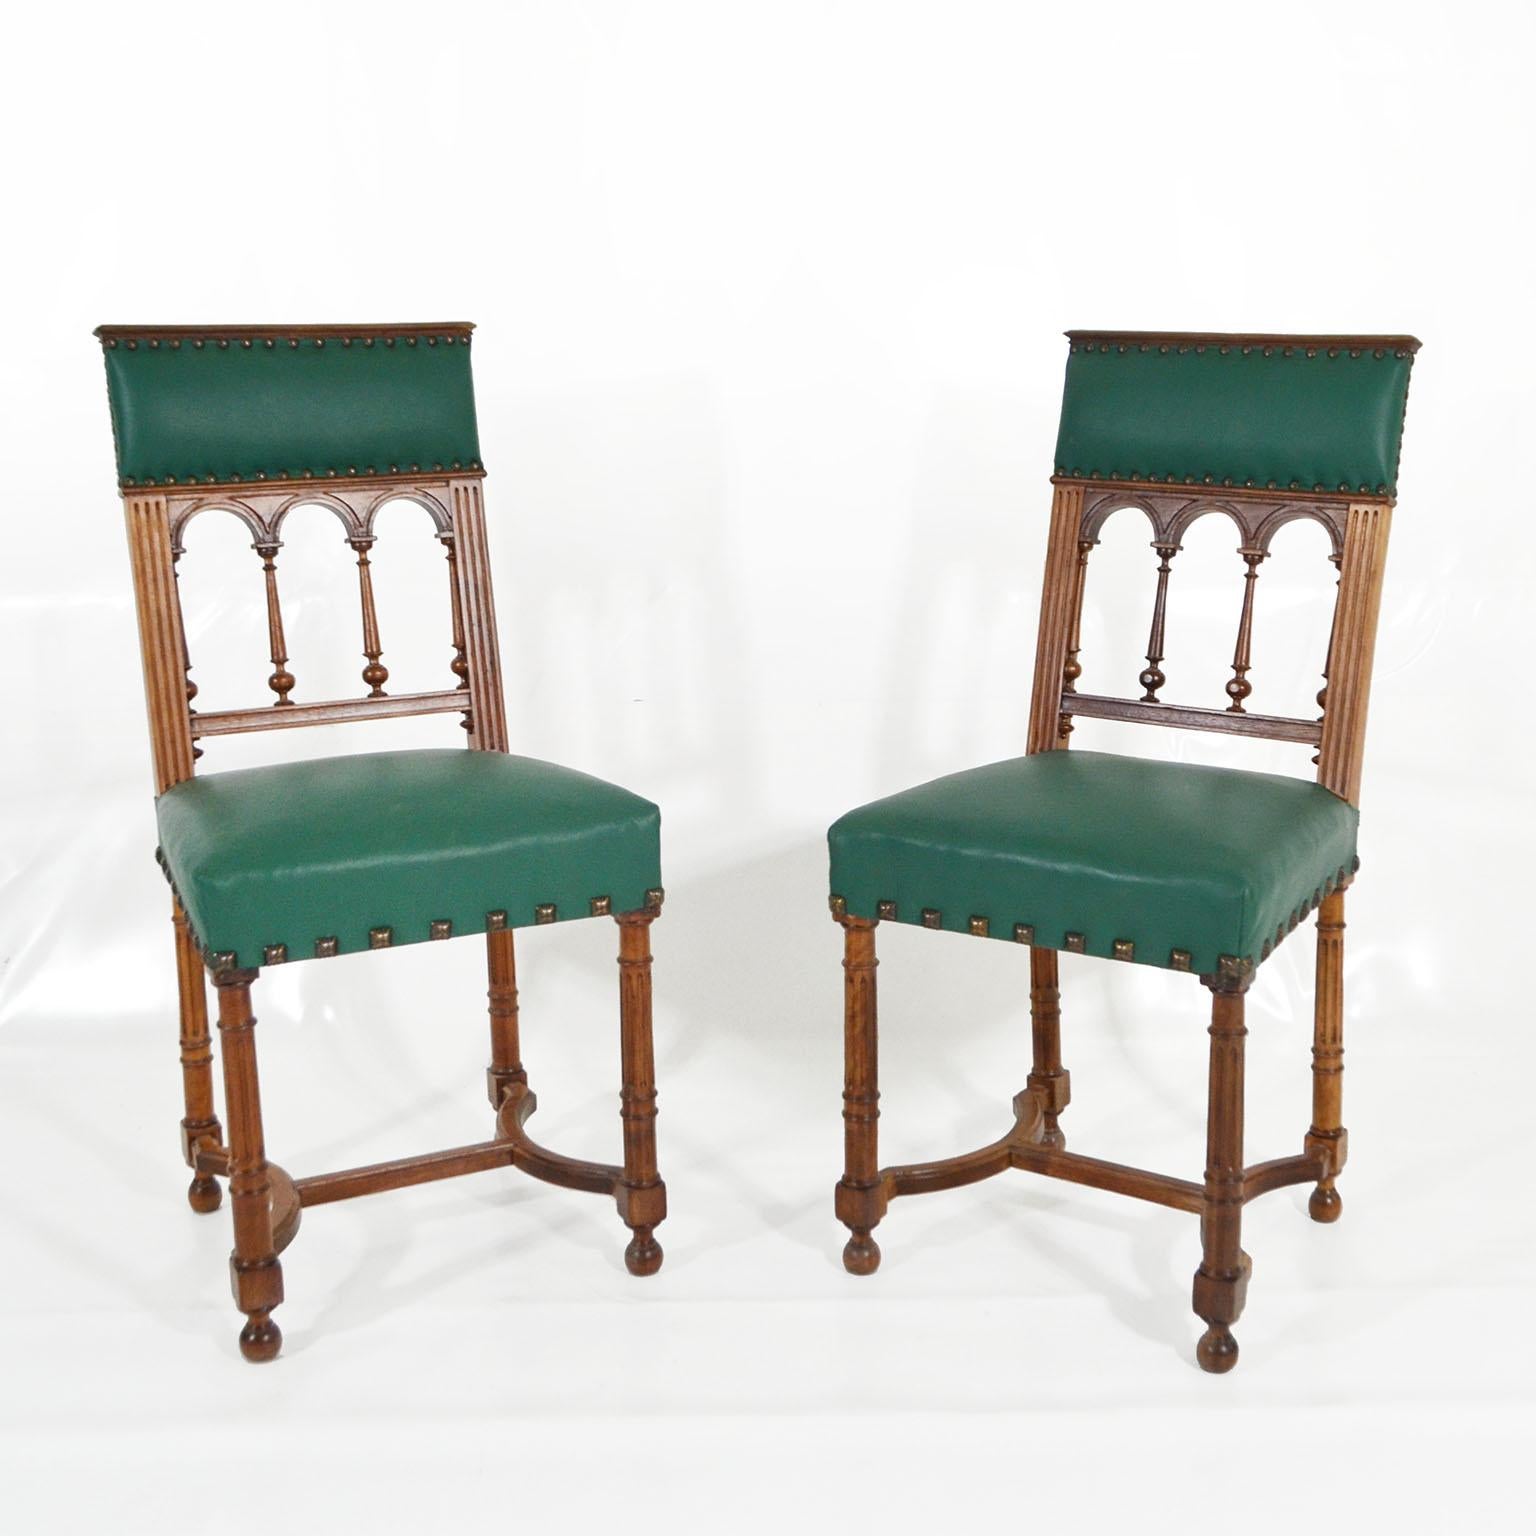 Renaissance Revival 19th Century Pair of Catalan Accent Chairs